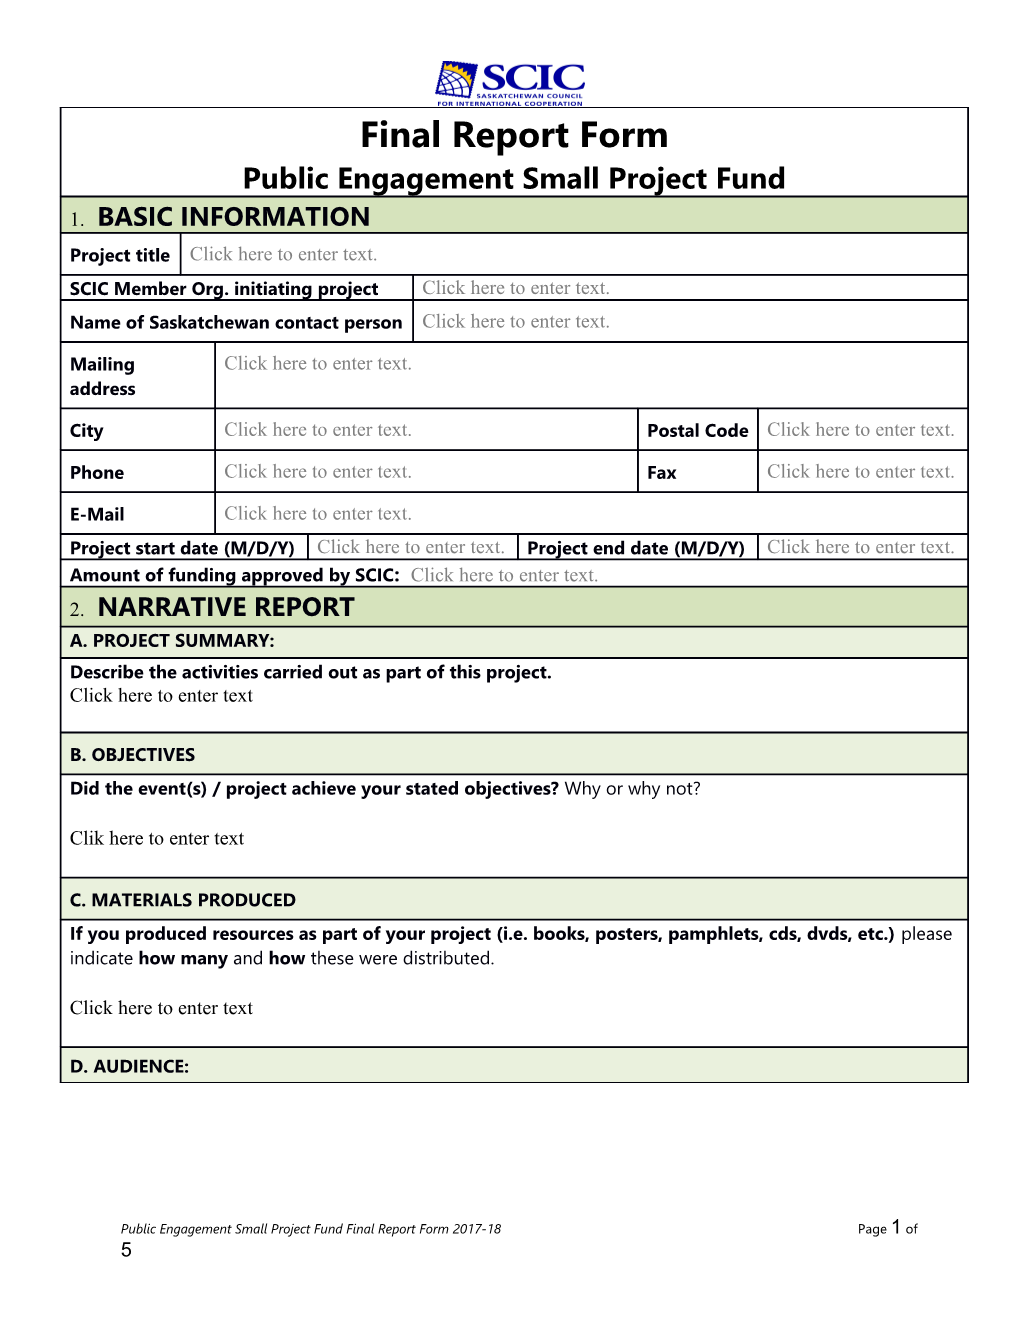 Public Engagement Small Project Fund Final Report Form2017-18 Page 1 of 4